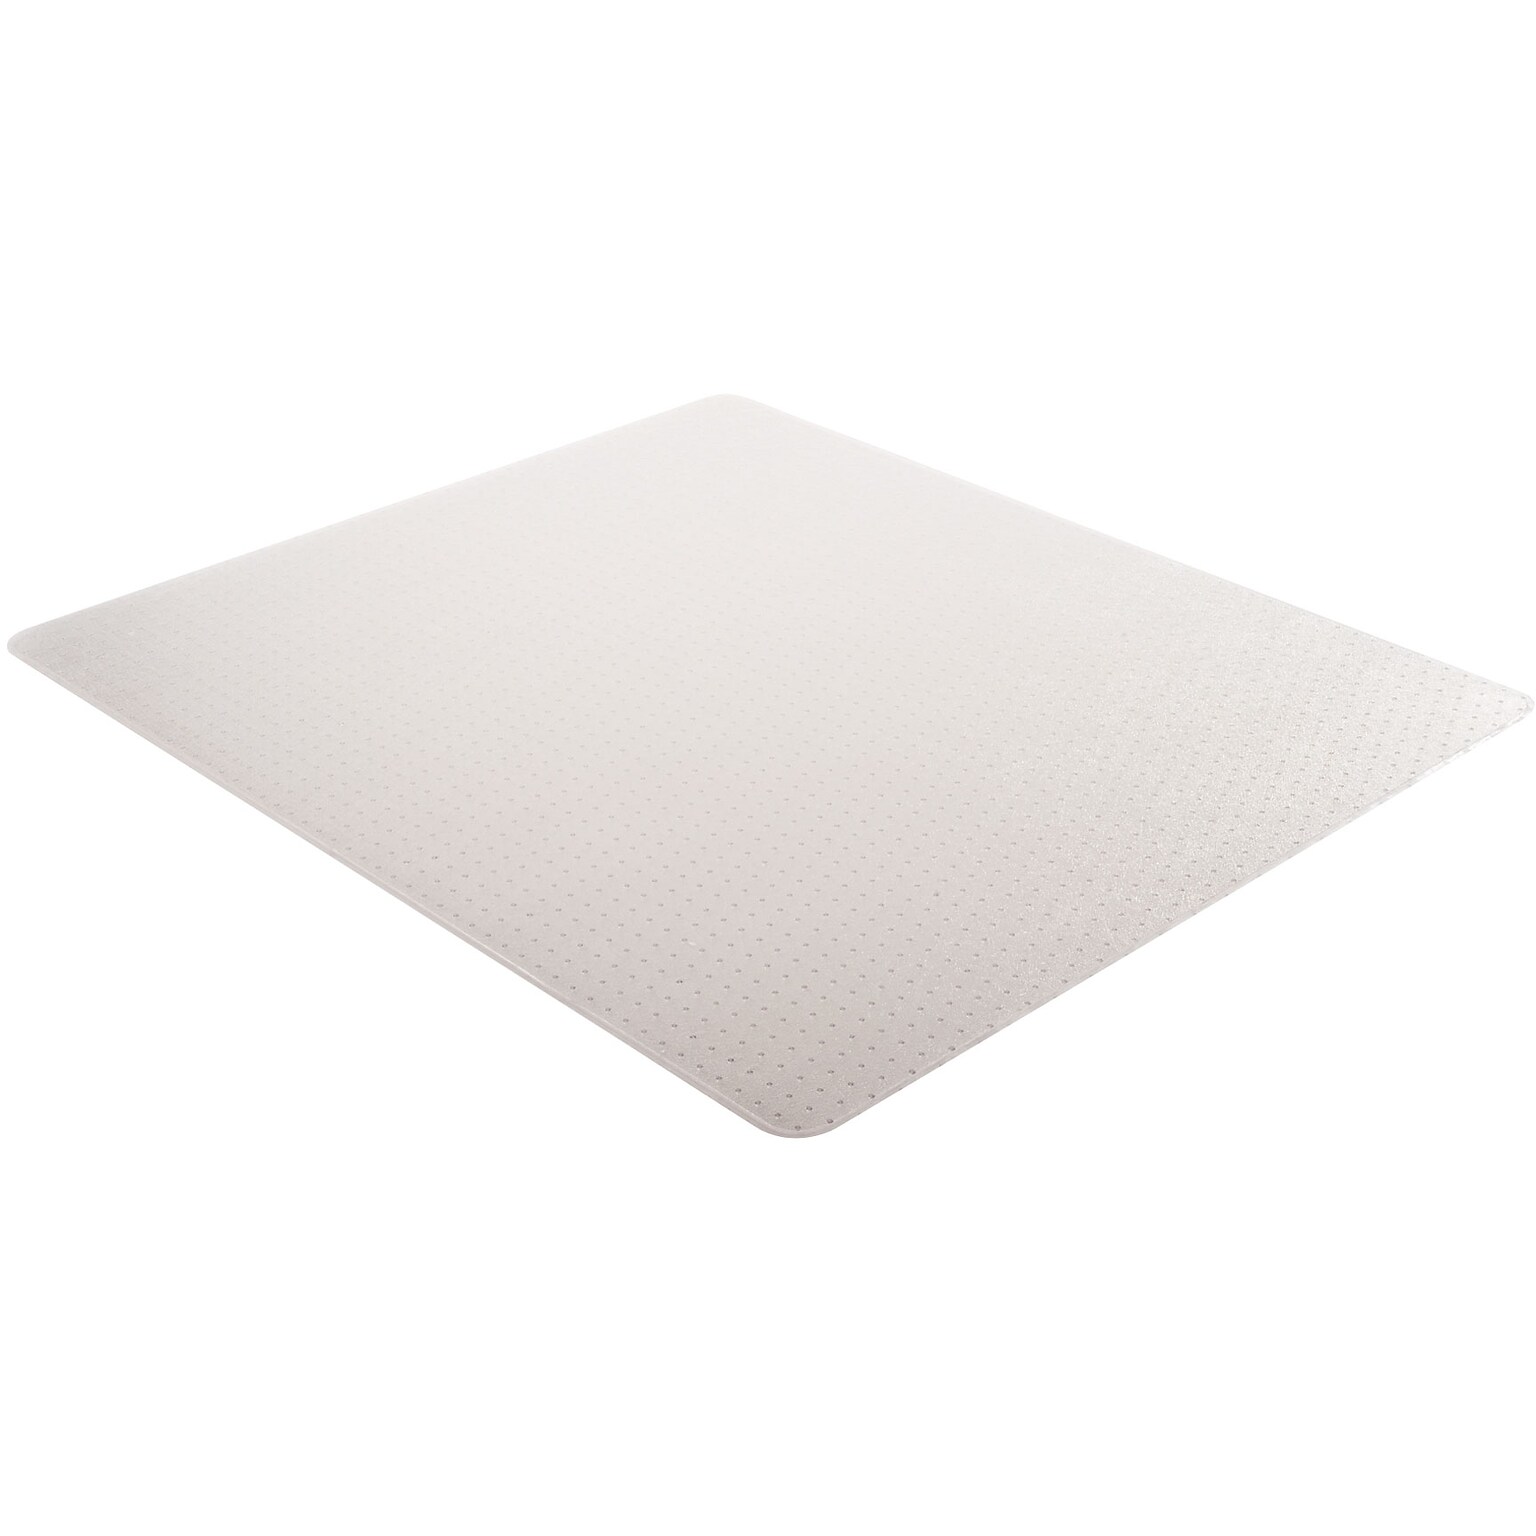 Deflect-O Studded 46x 60 Rectangle Rollformed Cartoned Chair Mat (CM11443FPB)